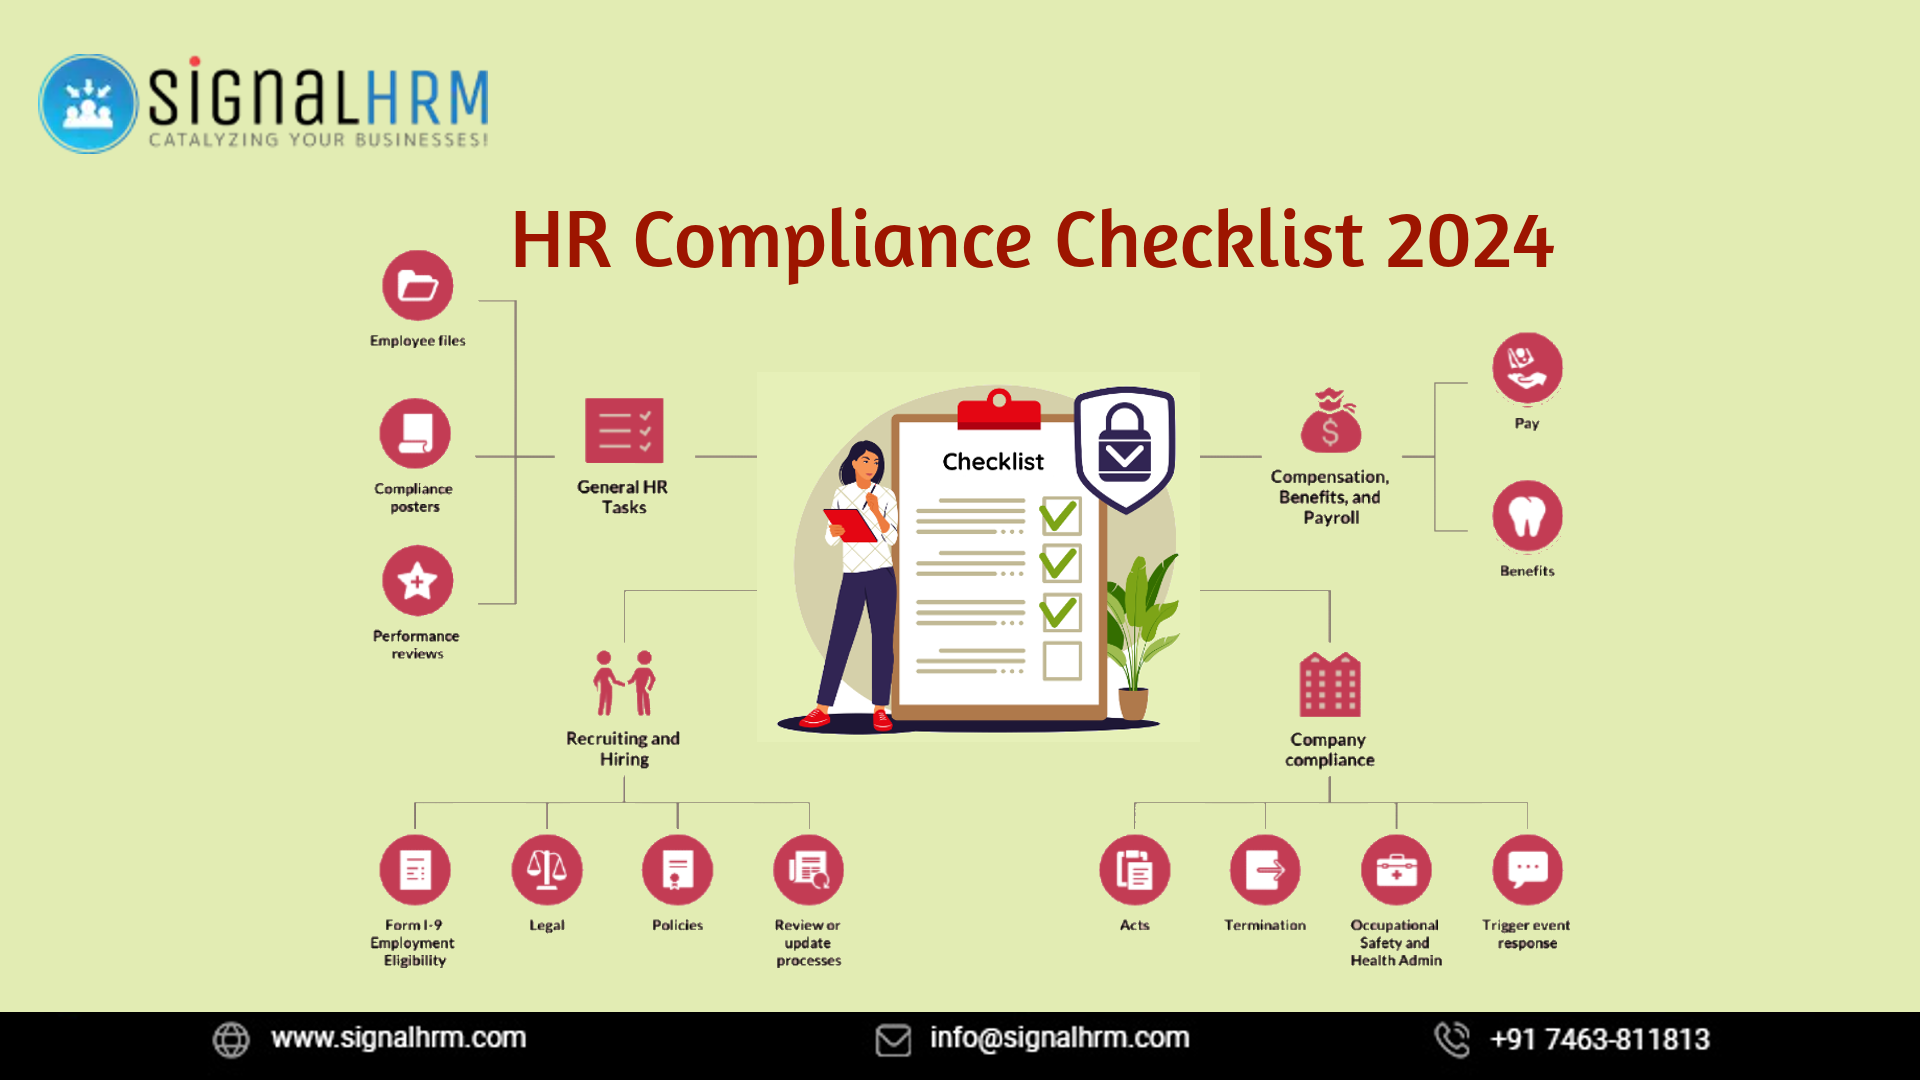 A Quick Guide to HR Compliance Checklist